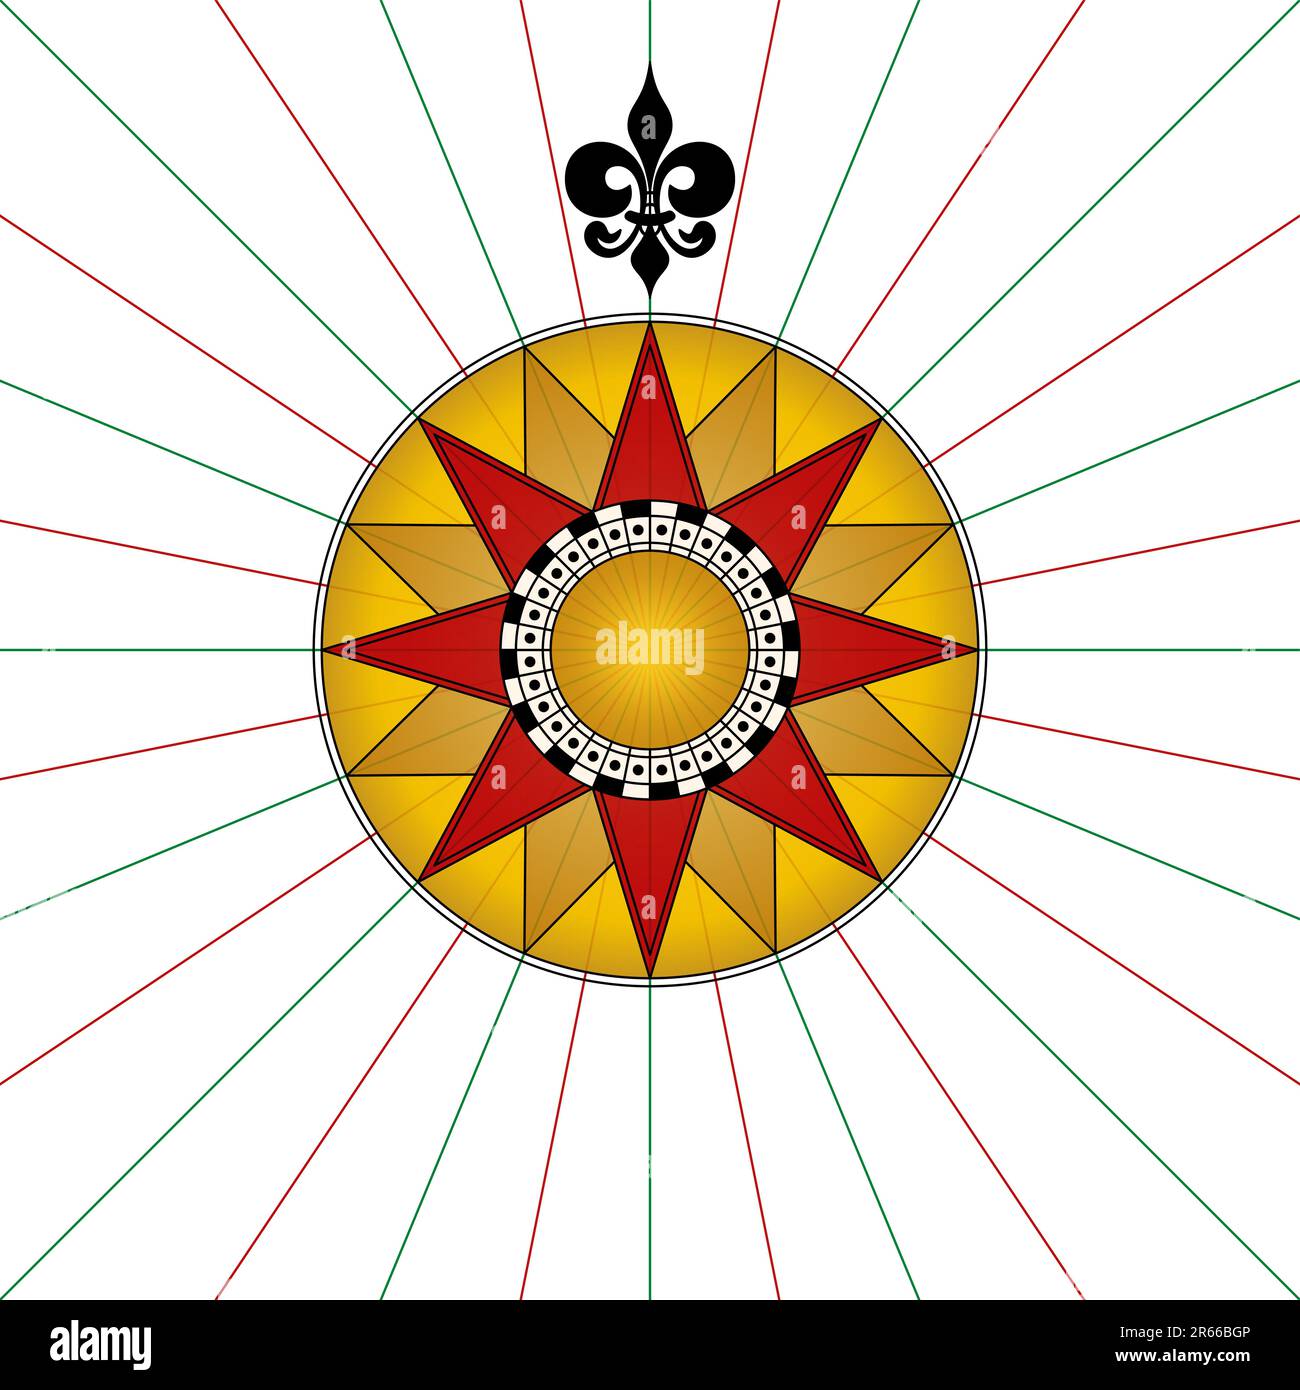 Compass rose with a fleur-de-lis pointing north. Compass star or wind rose with eight principal winds, showing the cardinal directions. Stock Photo